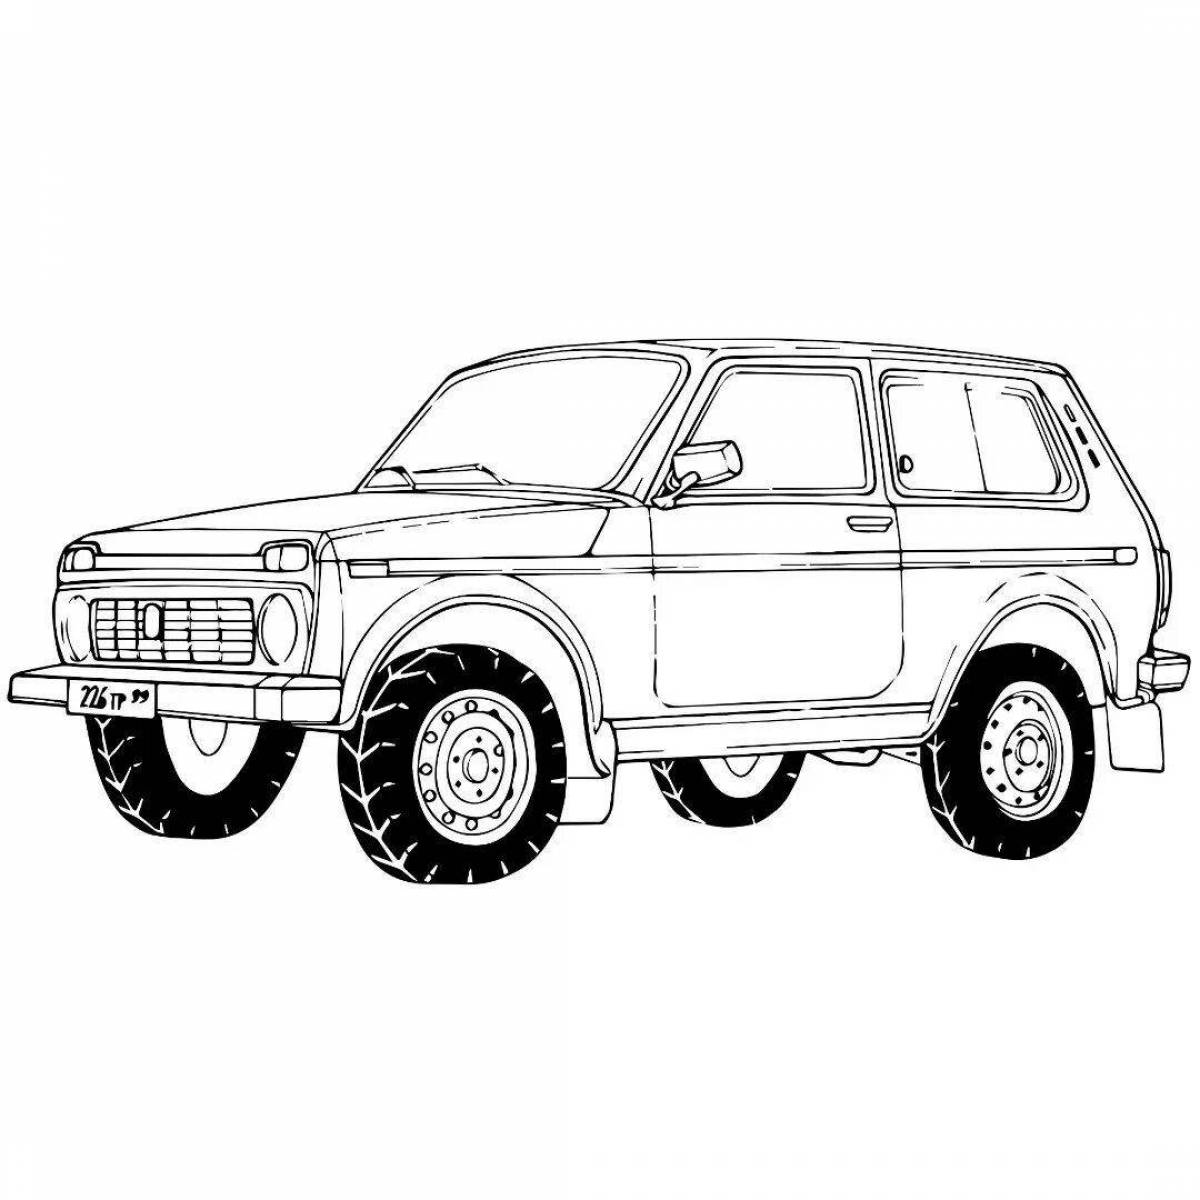 Coloring pages marvelous cars niva